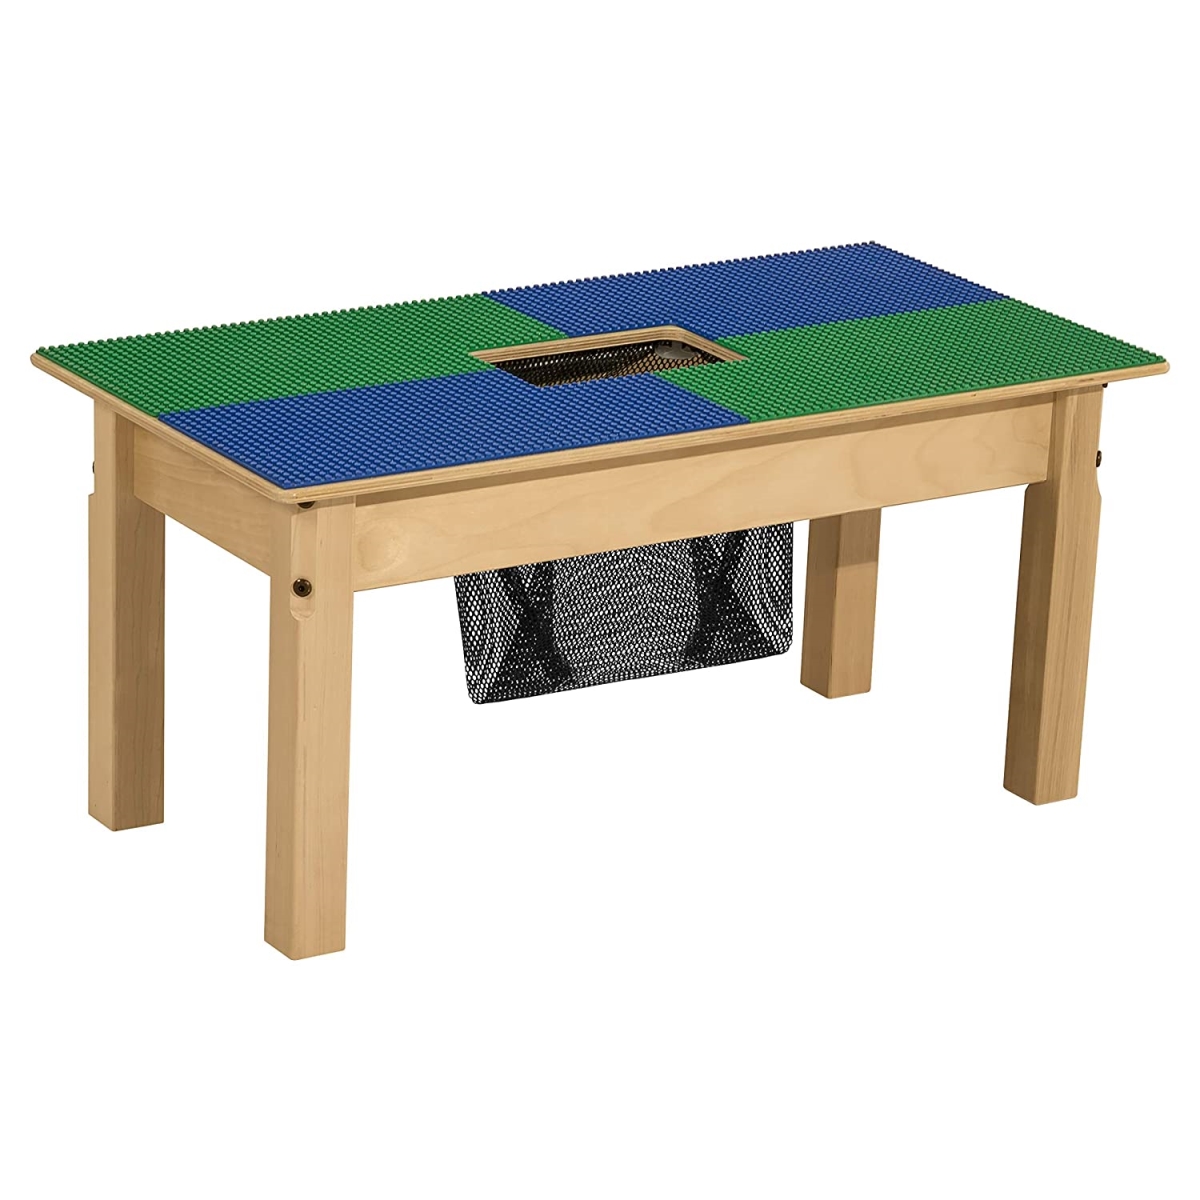 Tp1631sgn16-bg 16 In. Lego Compatible Table With Legs, Blue & Green - Rectangle